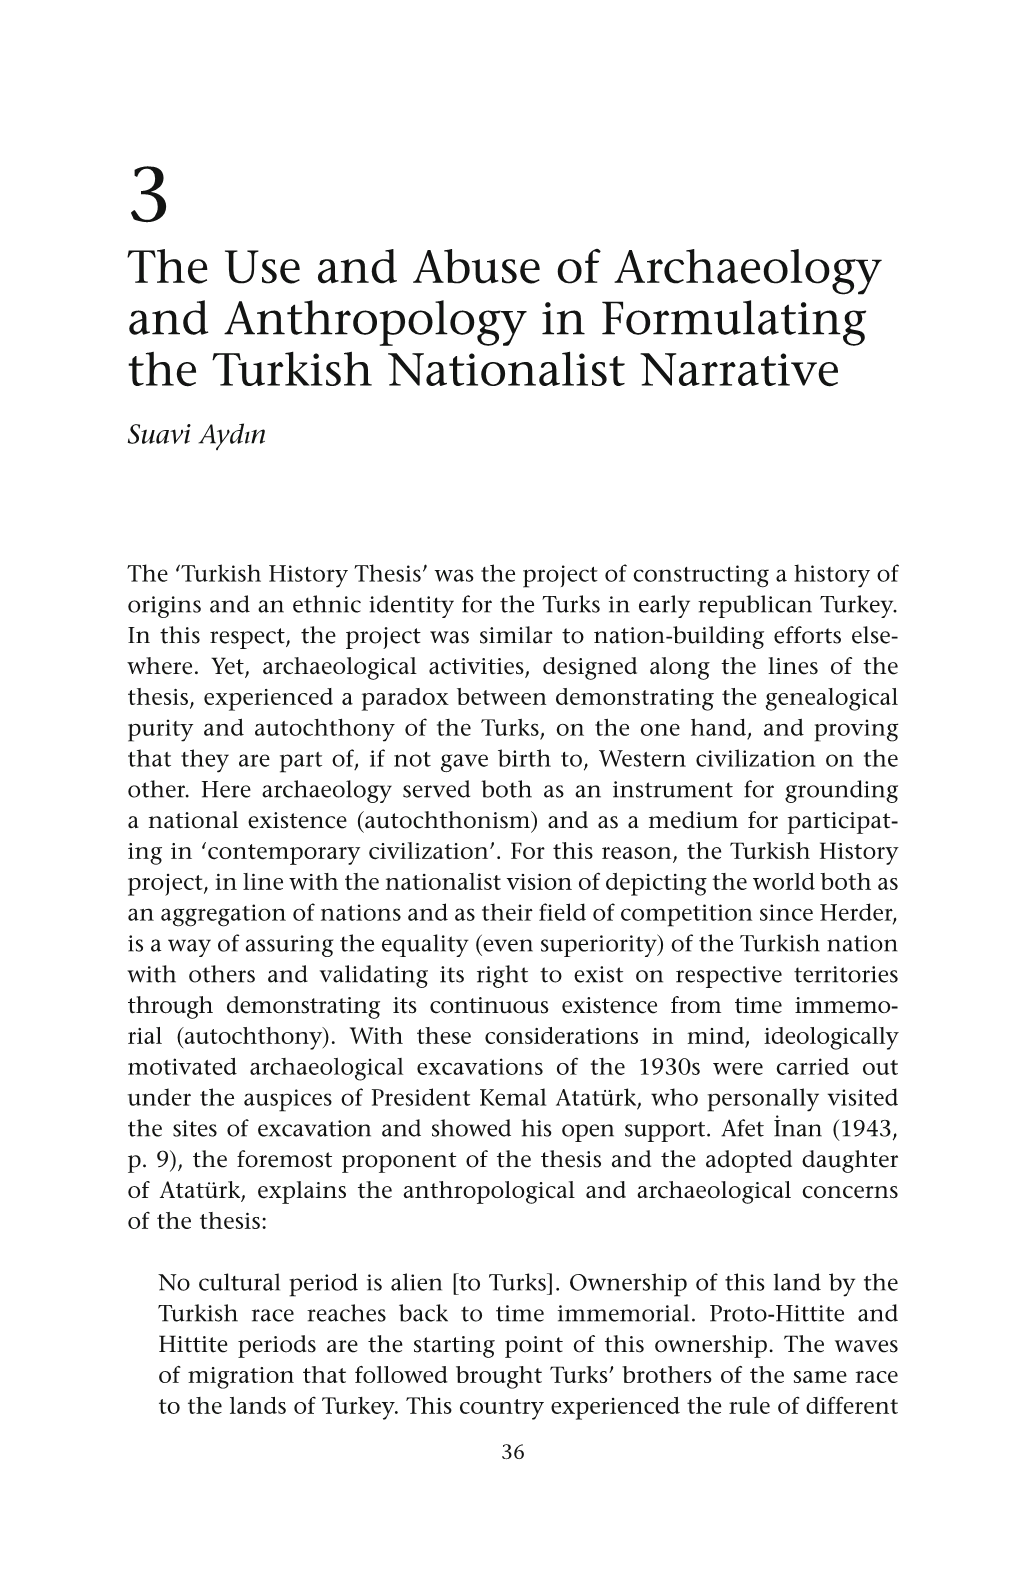 The Use and Abuse of Archaeology and Anthropology in Formulating the Turkish Nationalist Narrative